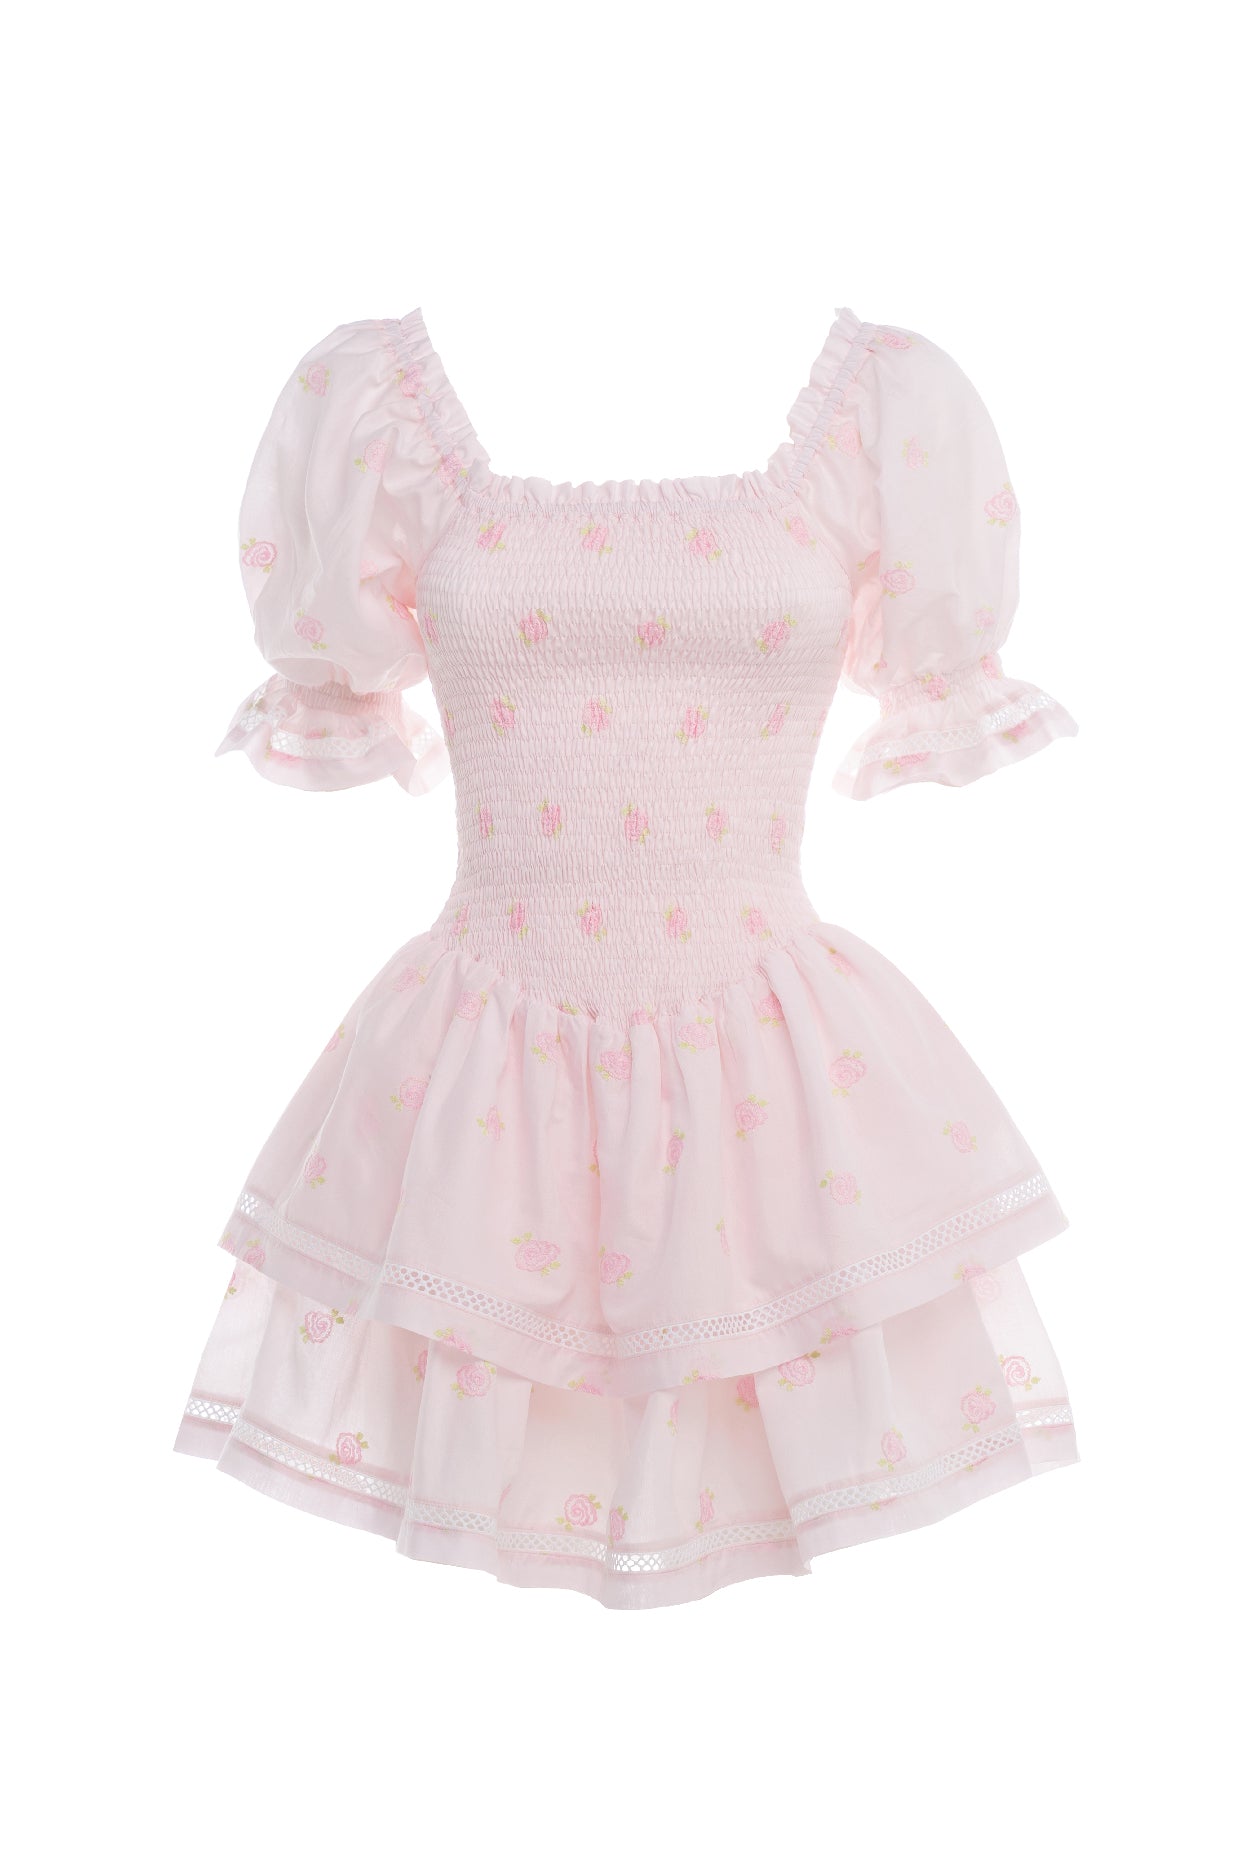 Dolly Classic Dress